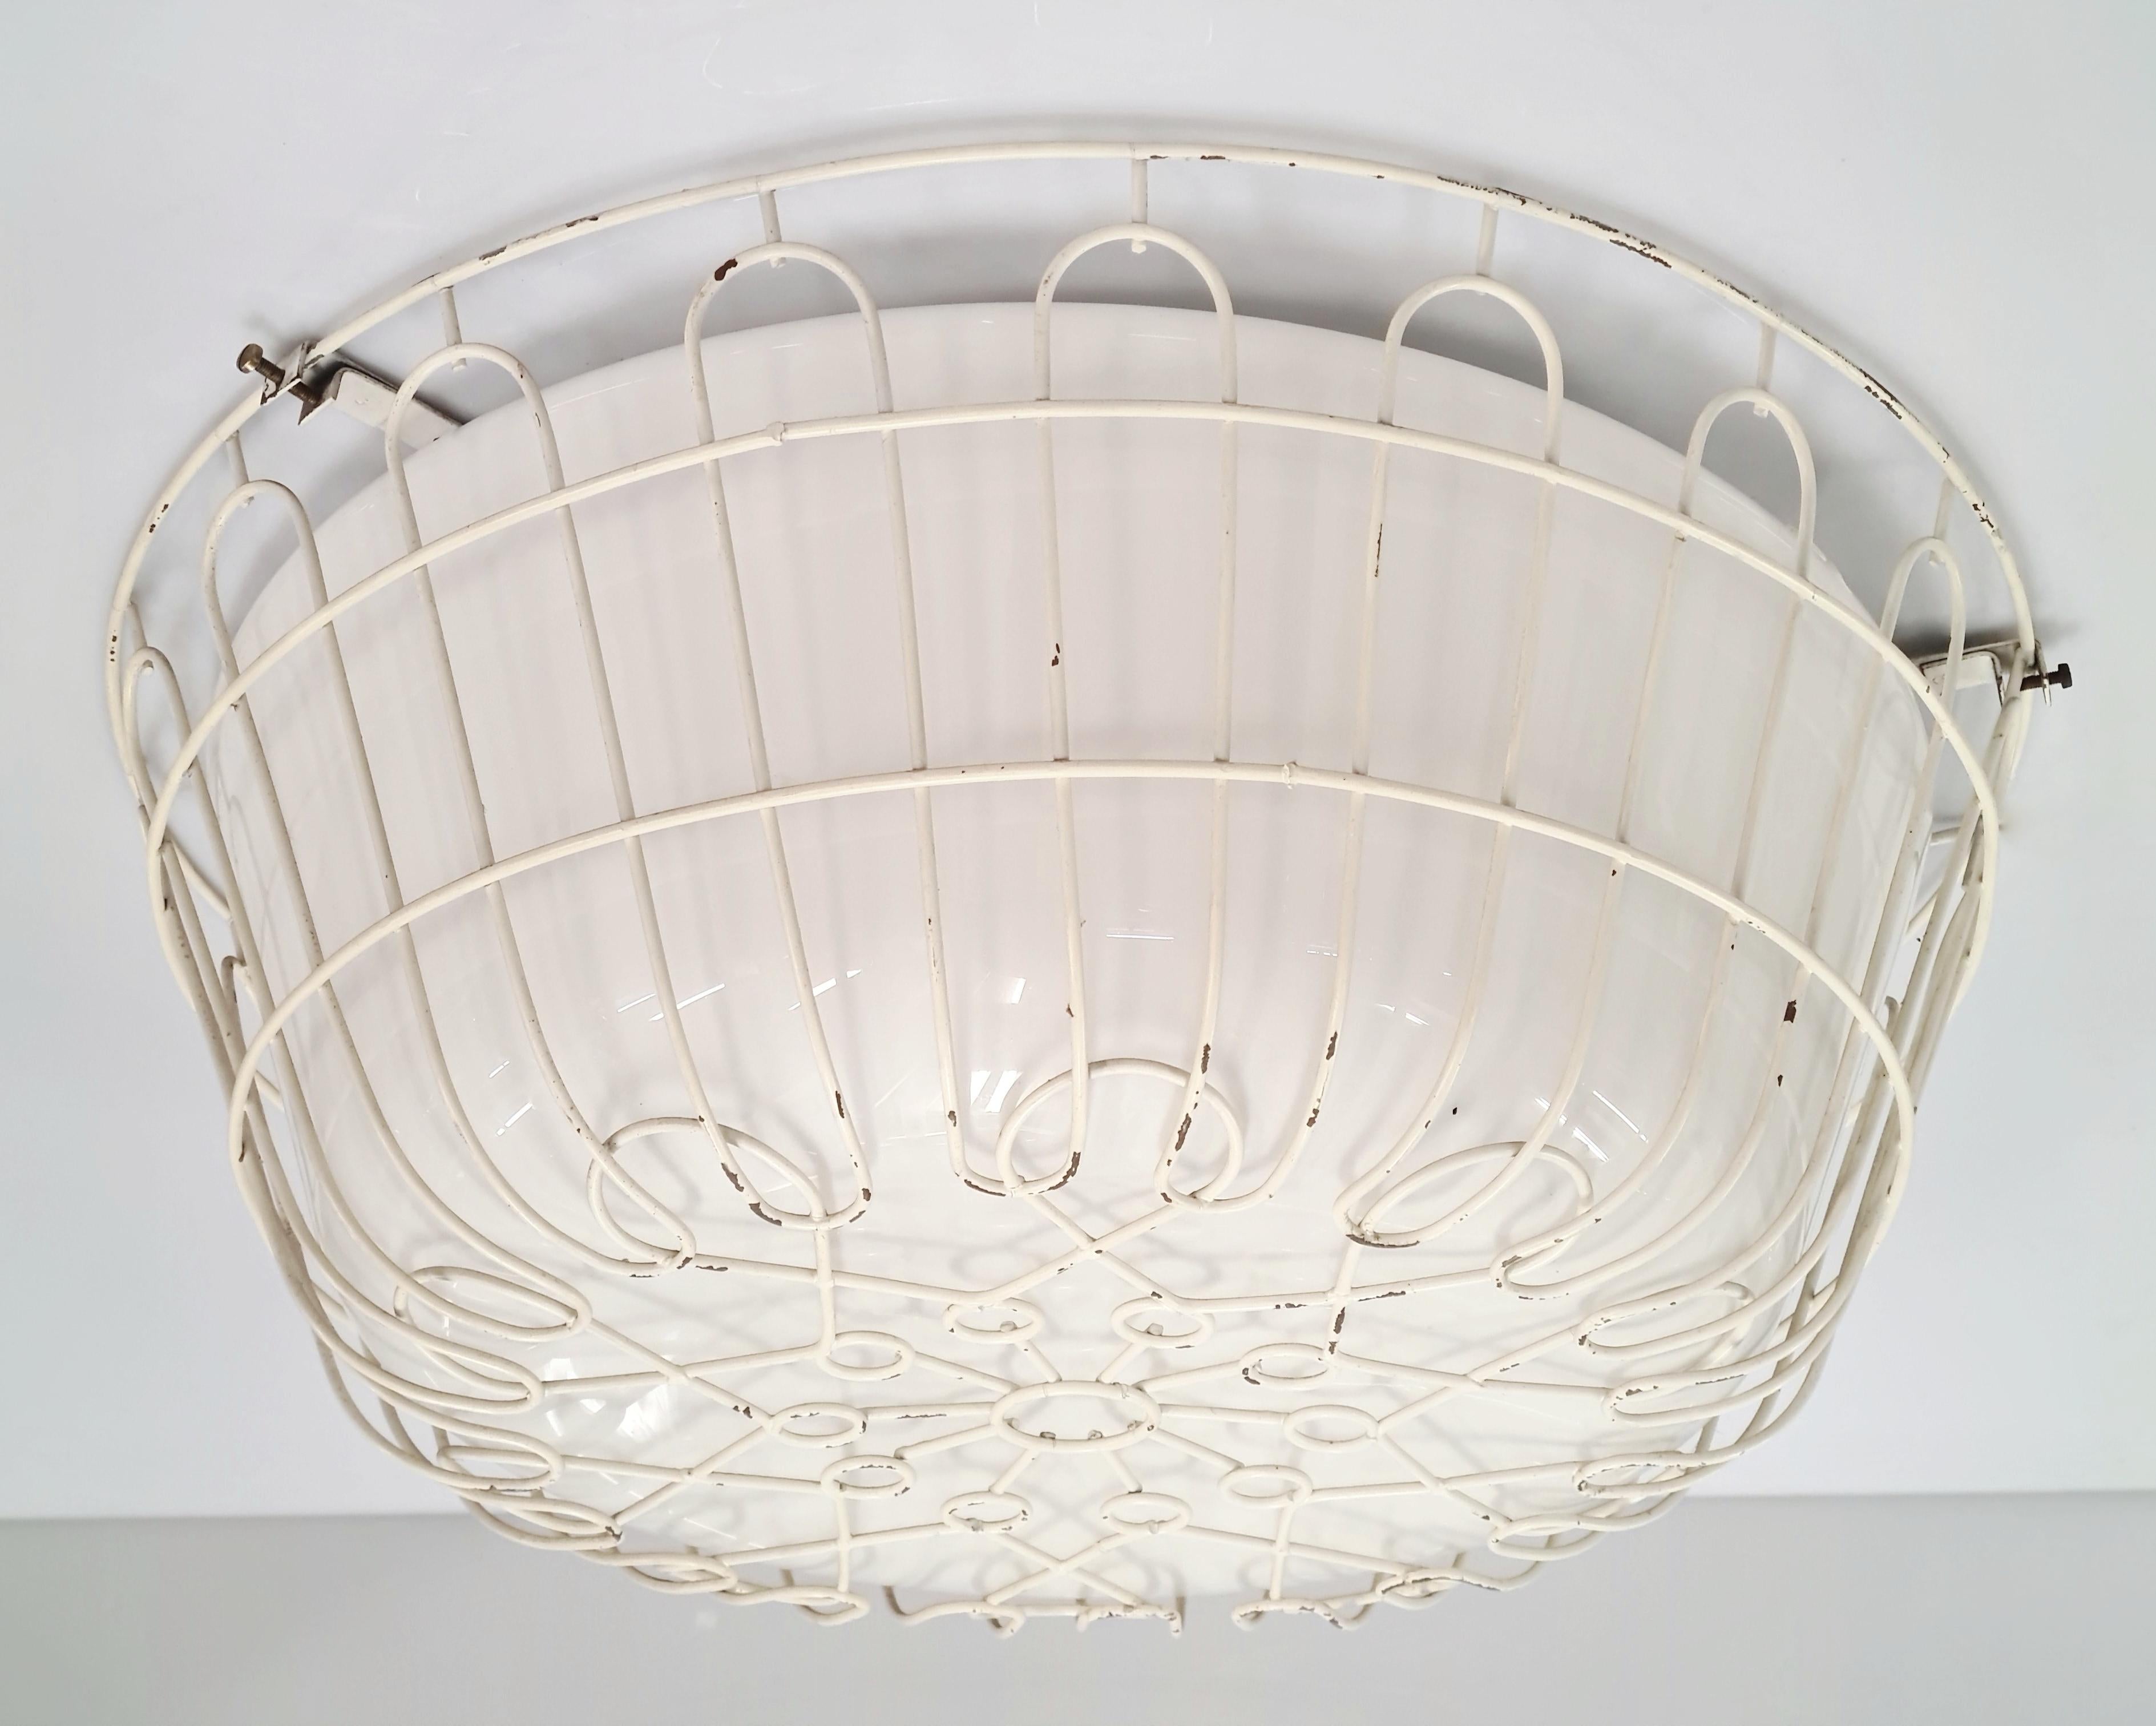 Finnish A Beautiful and Lively Lisa Johansson-Papé Ceiling Lamp Model 71-115, Orno 1950s For Sale